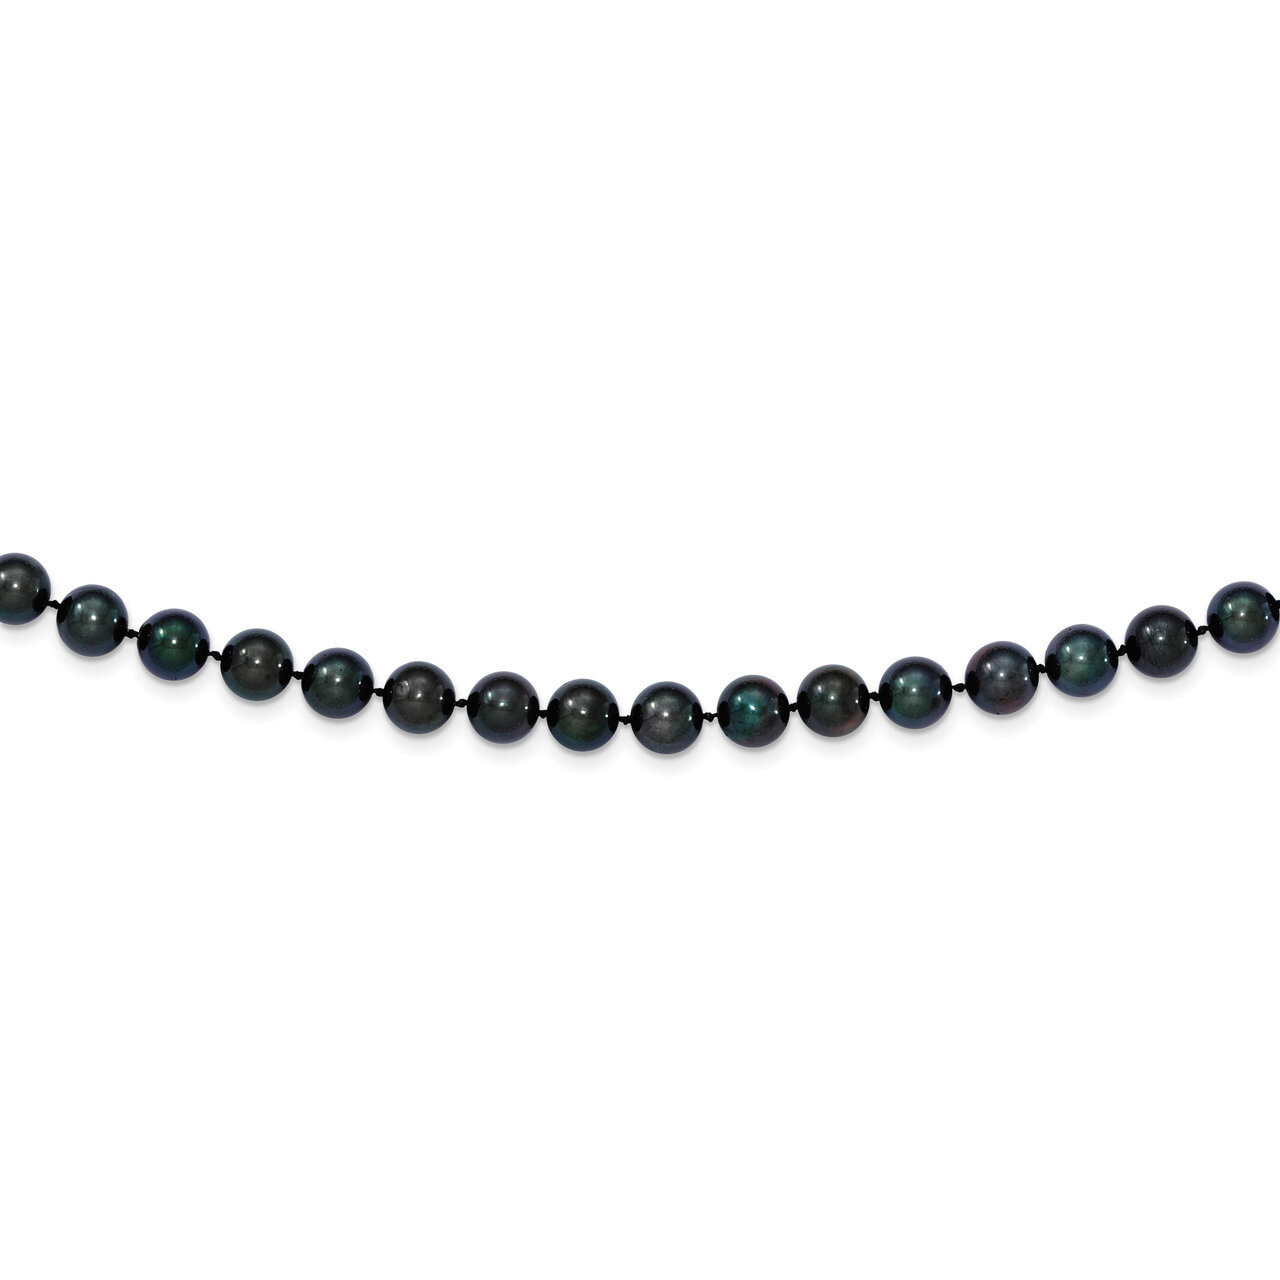 24 Inch 7-8mm Round Black Saltwater Akoya Cultured Pearl Necklace 14k white Gold PLB70-24